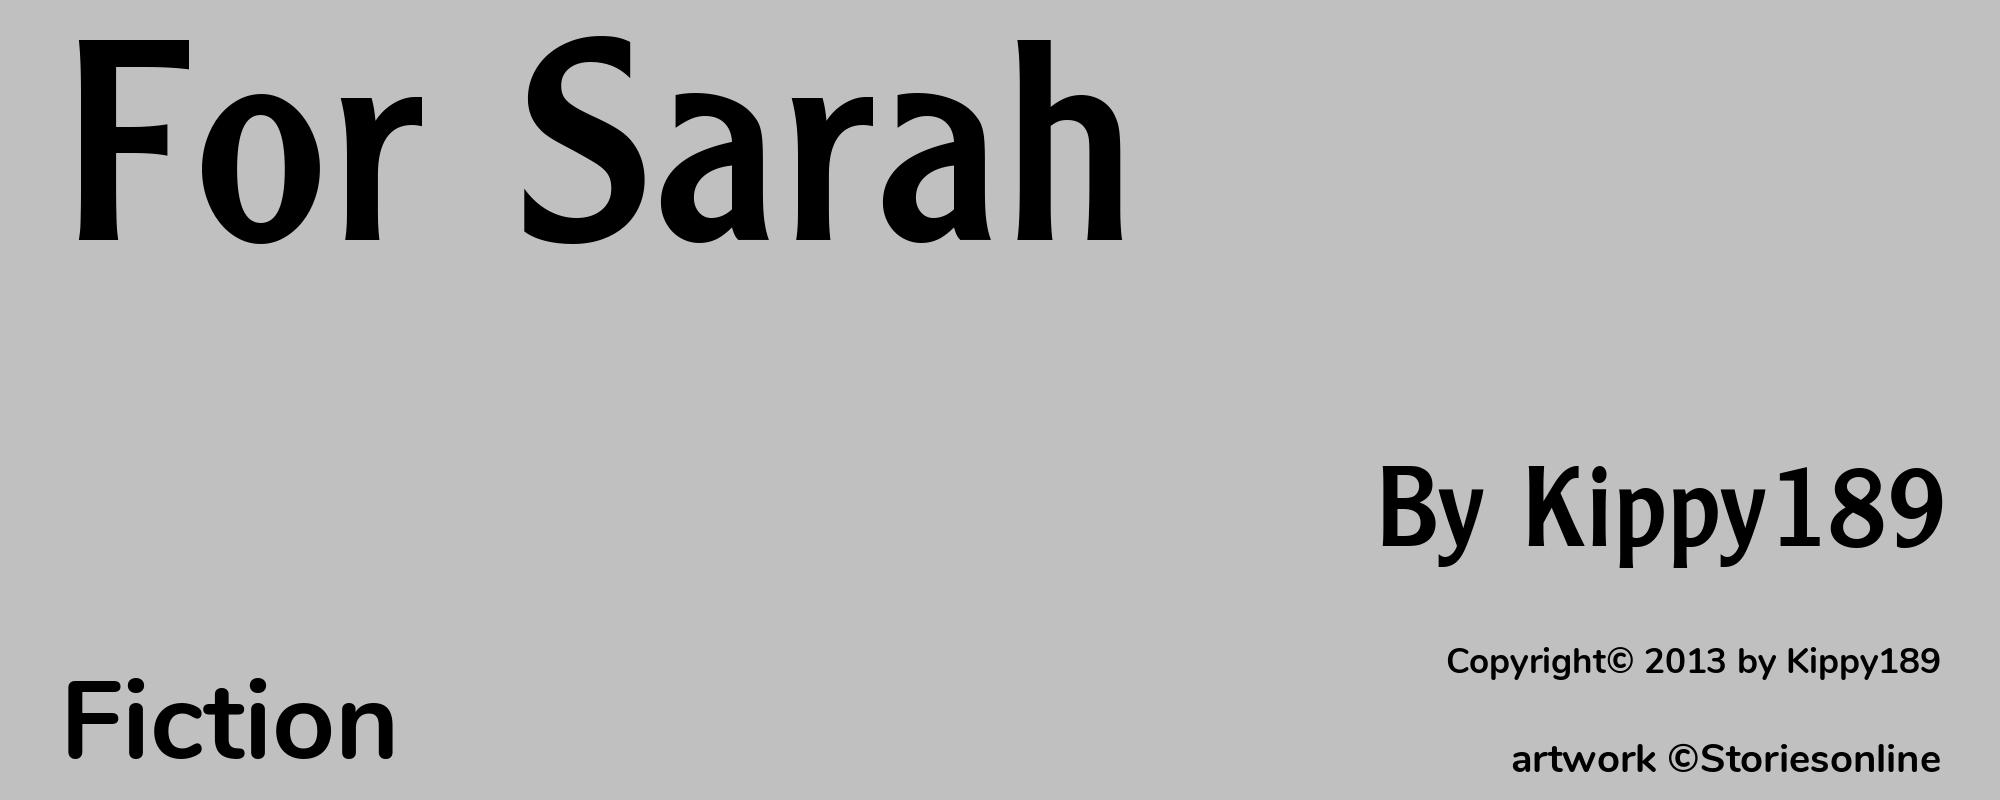 For Sarah - Cover